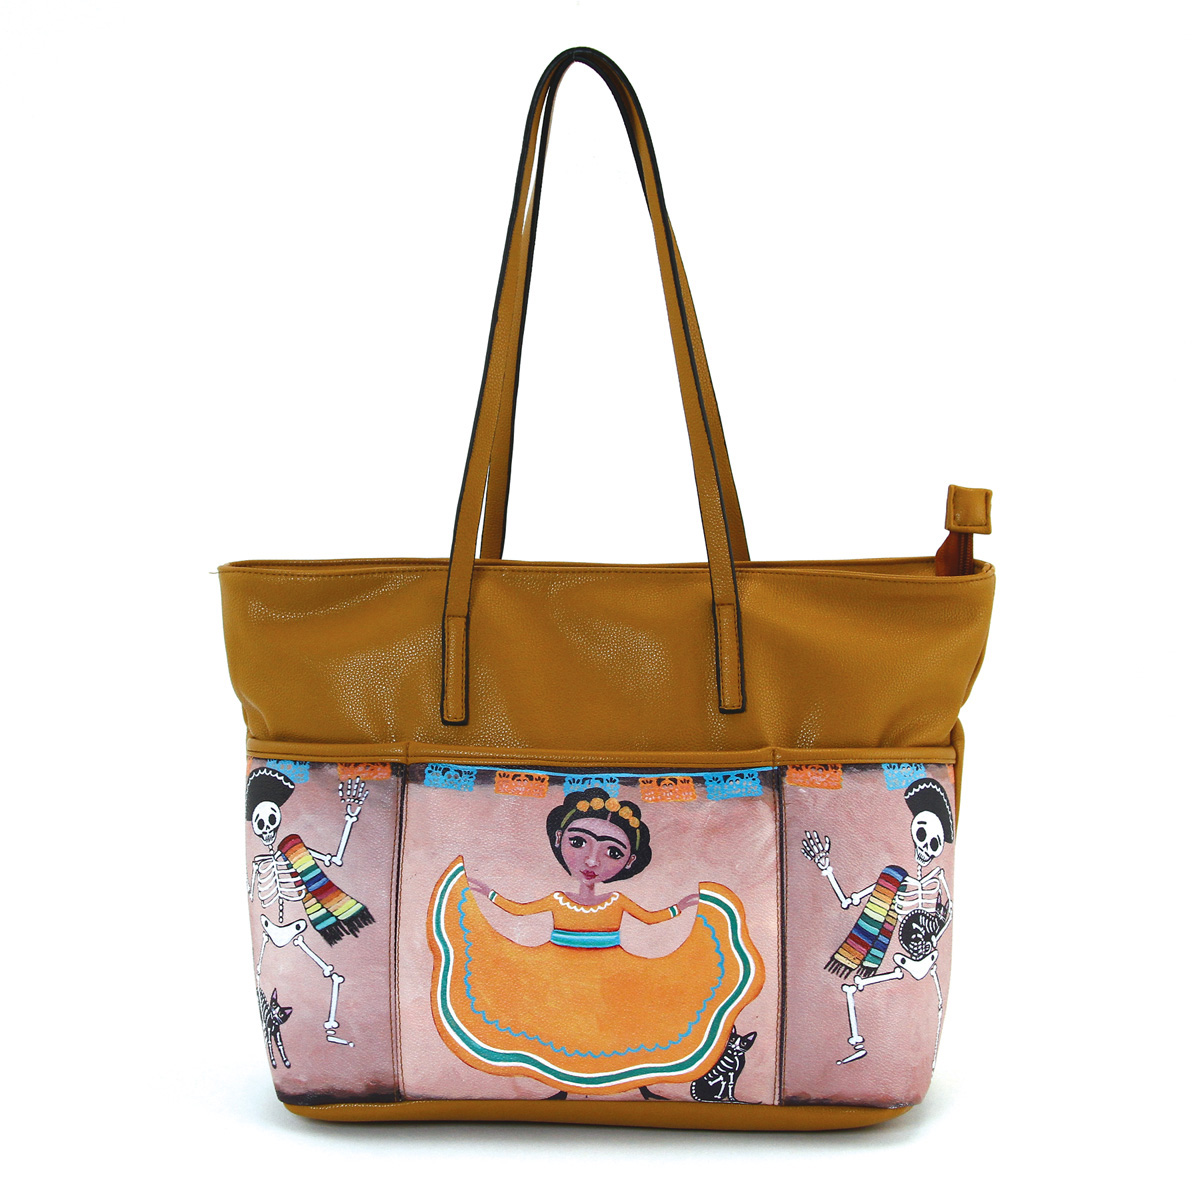 3 Pockets Dancing Frida & Maricachi Skeletons Tote by Comeco - in tan